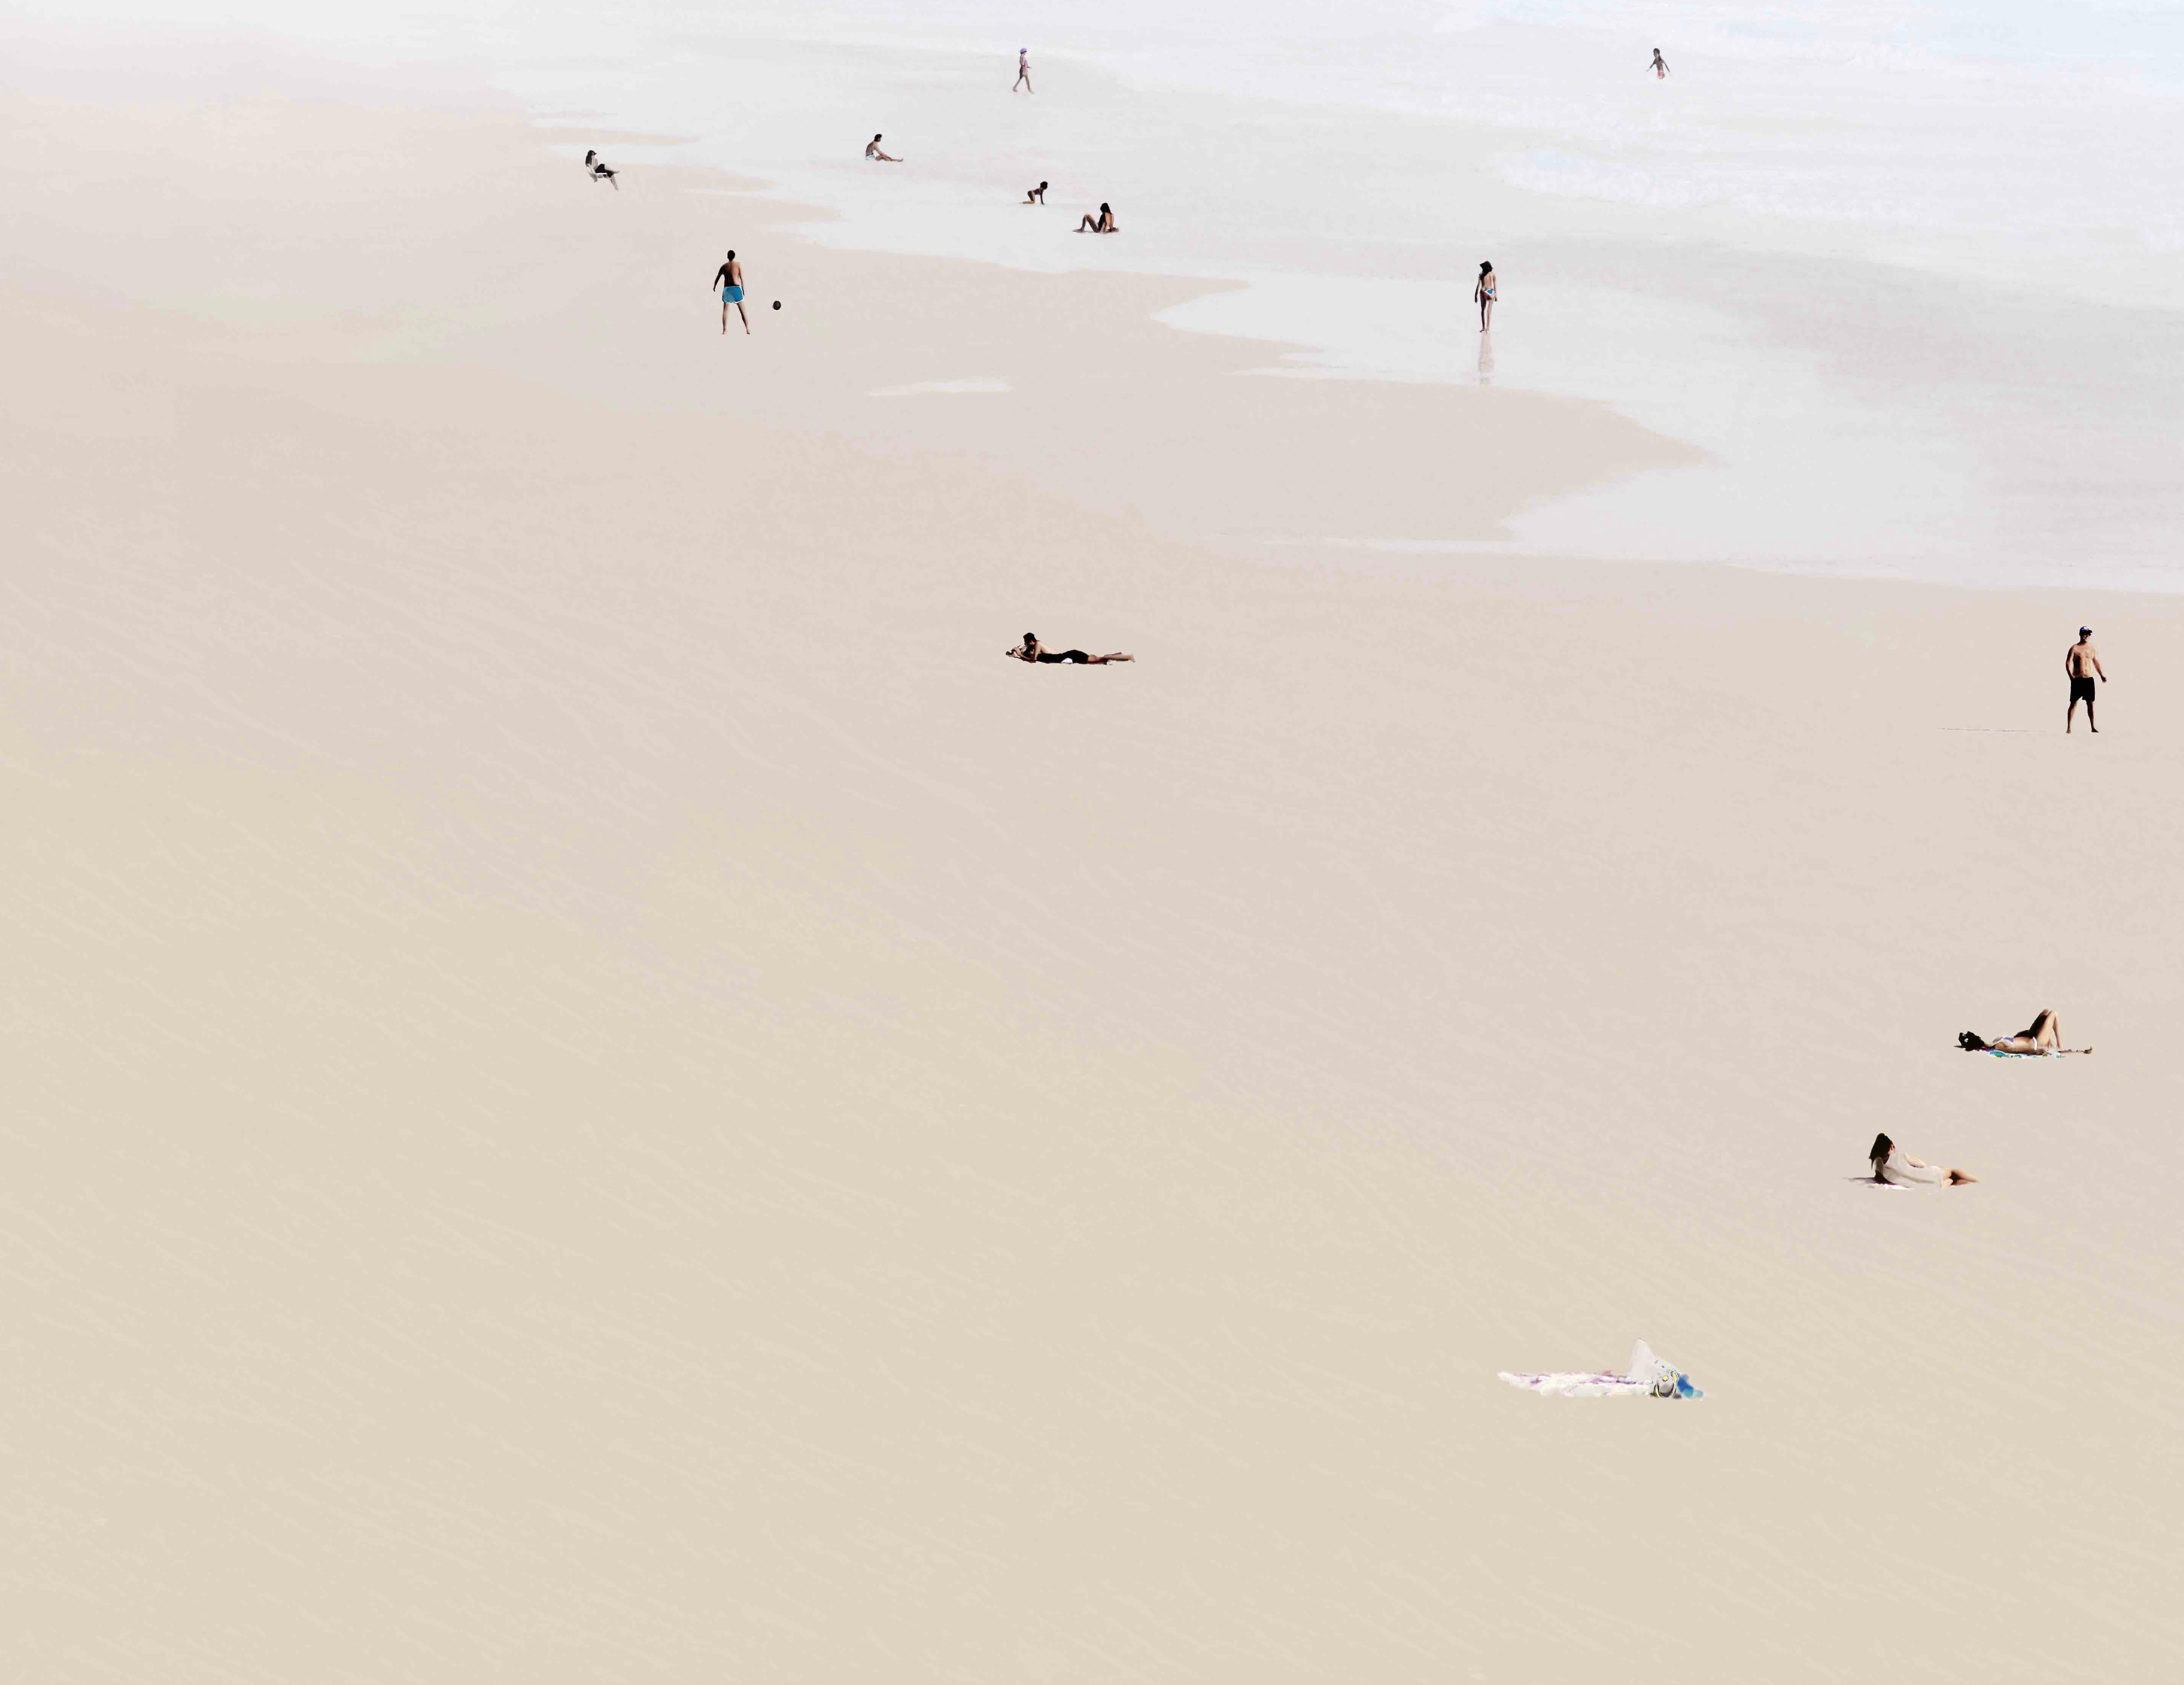 This art work is a photo of the Tel Aviv beach taken by Pardo and then manipulated to make it look as a surreal beach.
The people were there, playing, surfing, lying down. Pardo just played with the colors, confusing the viewer whether it is a